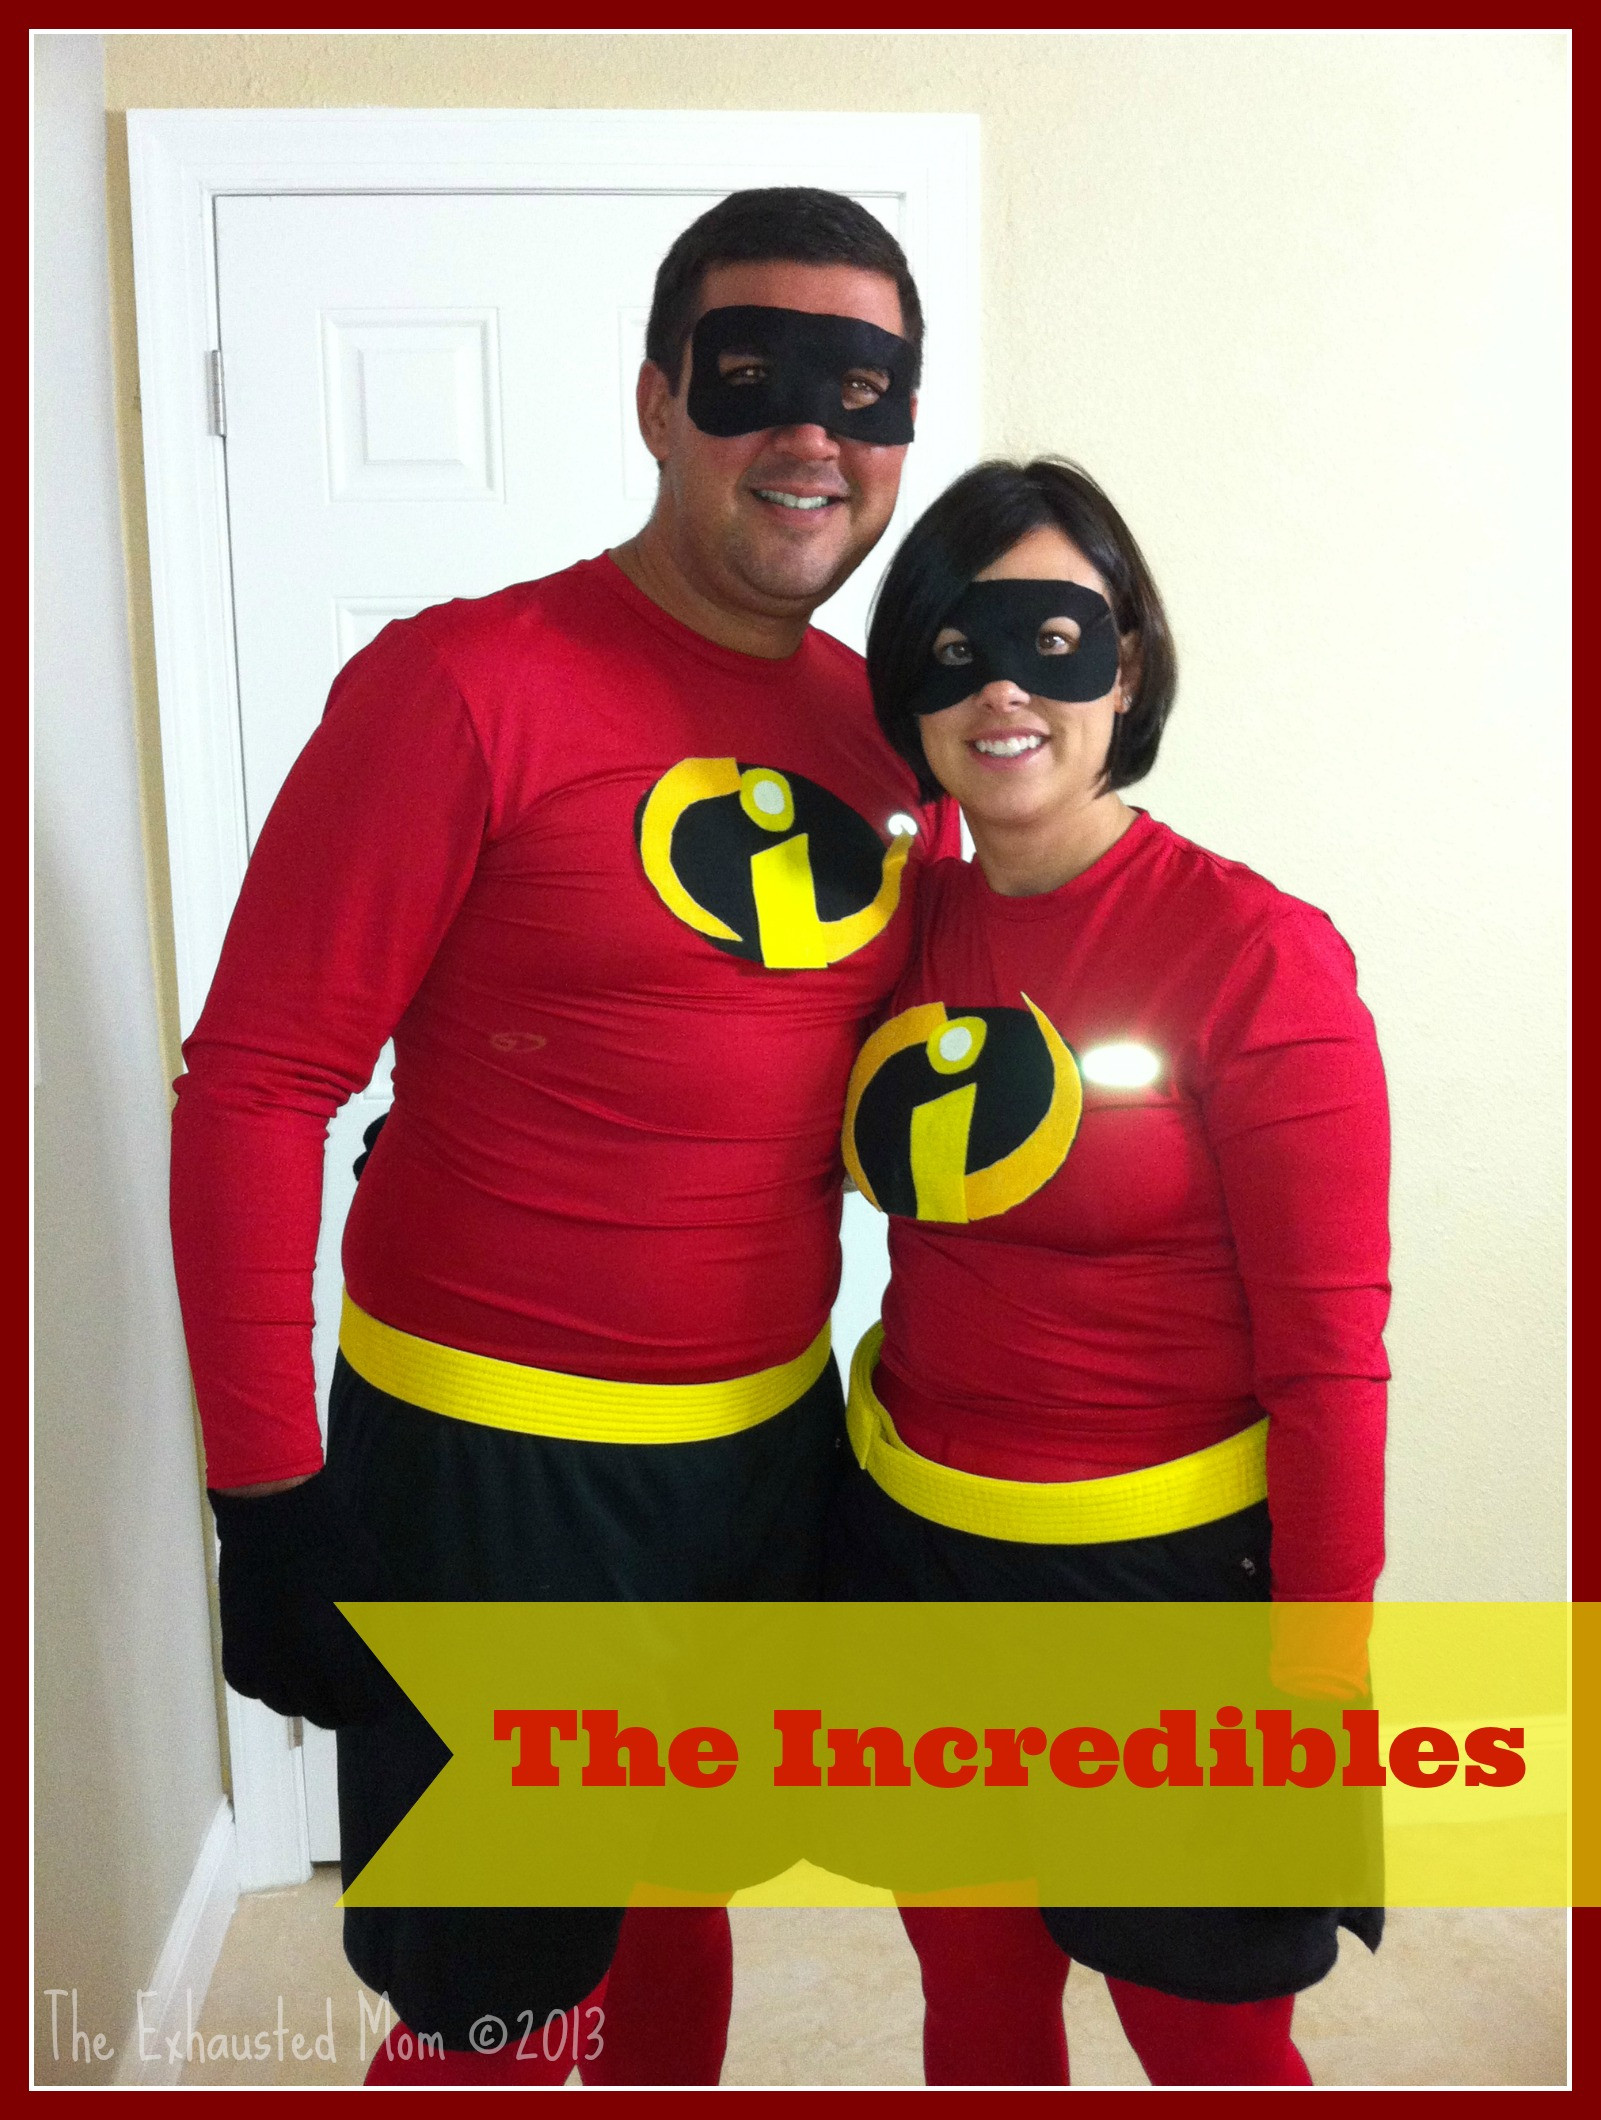 Incredibles Costume DIY
 Couples Halloween Costume Ideas The Exhausted Mom